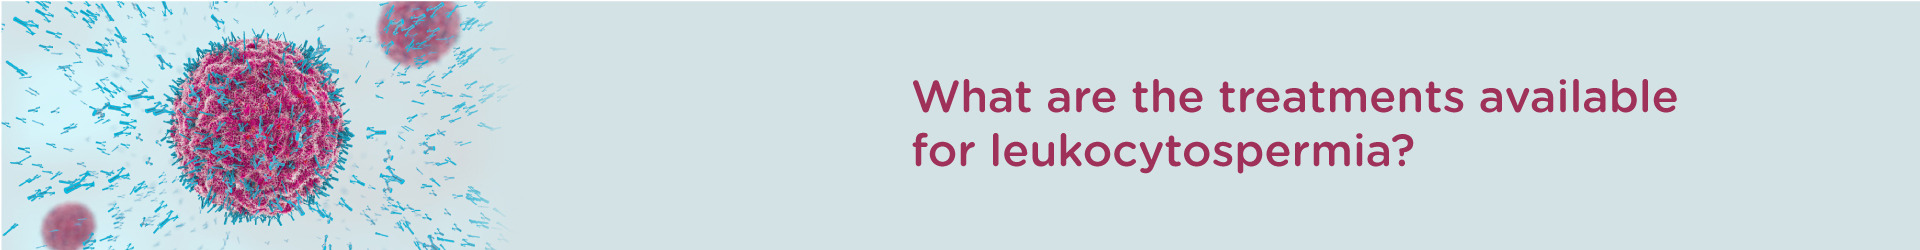 What are the Treatments Available for Leukocytospermia?